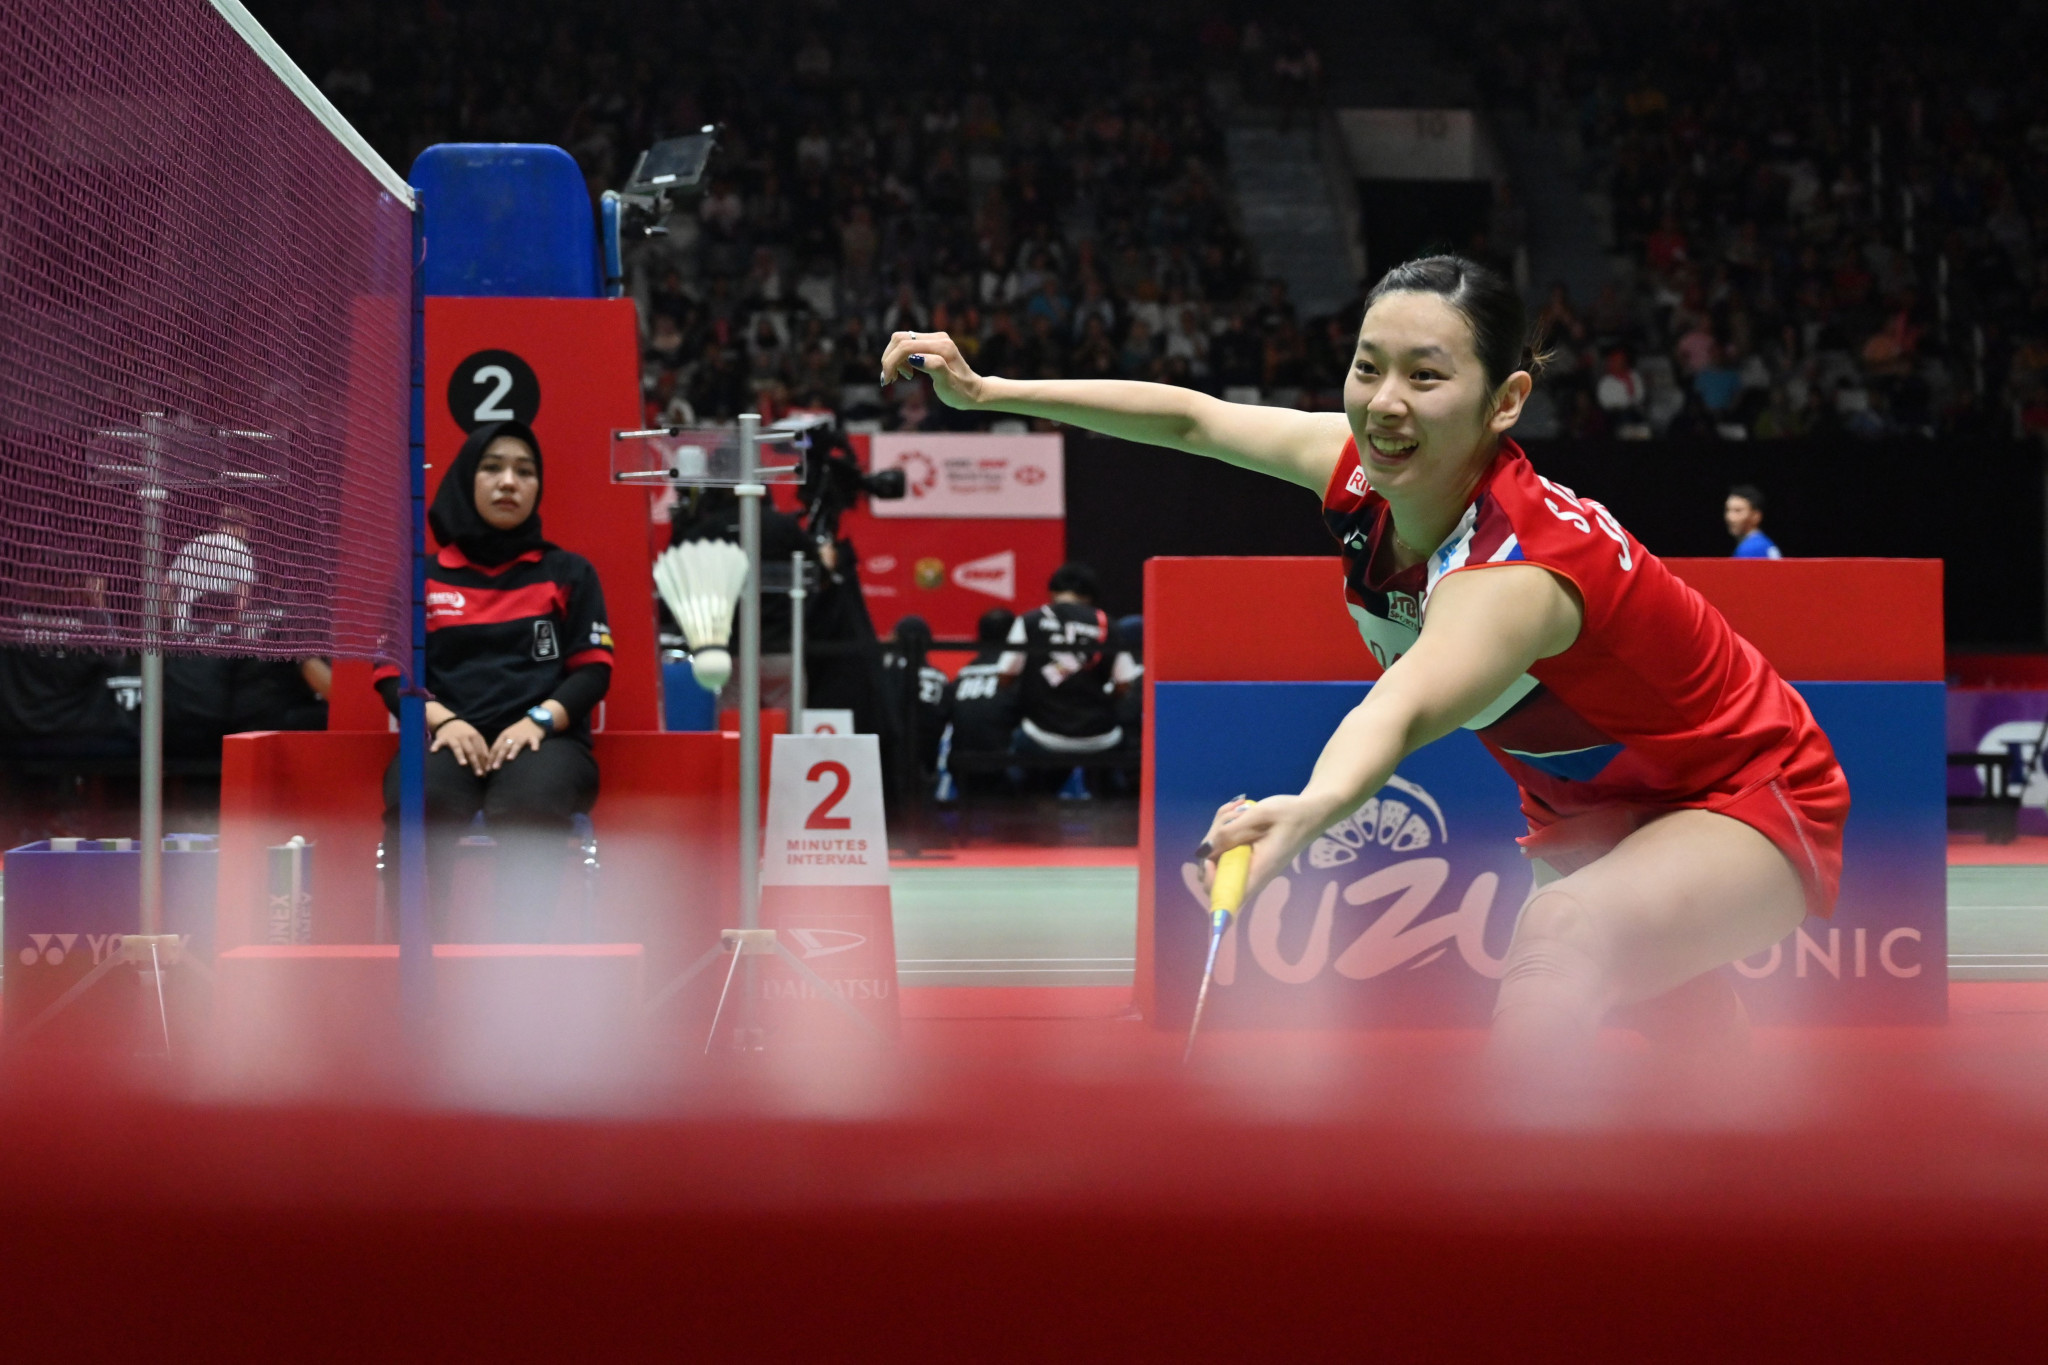 Japan and Indonesia retain titles at Badminton Asia Team Championships